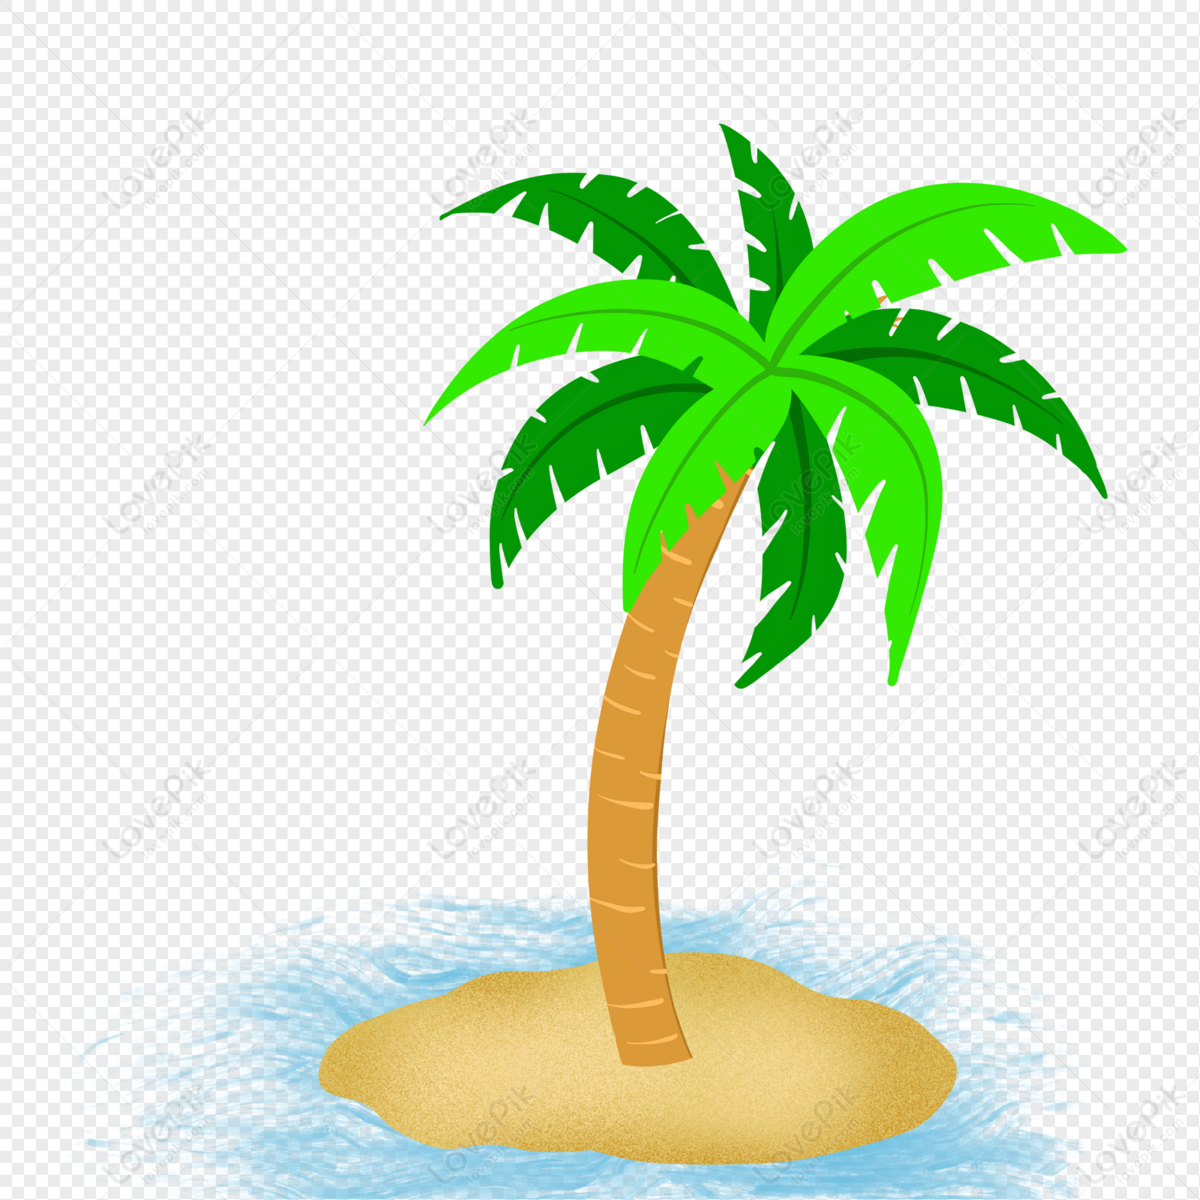 Cartoon Green Coconut Tree Illustration Free PNG And Clipart Image For Free  Download - Lovepik | 401531609